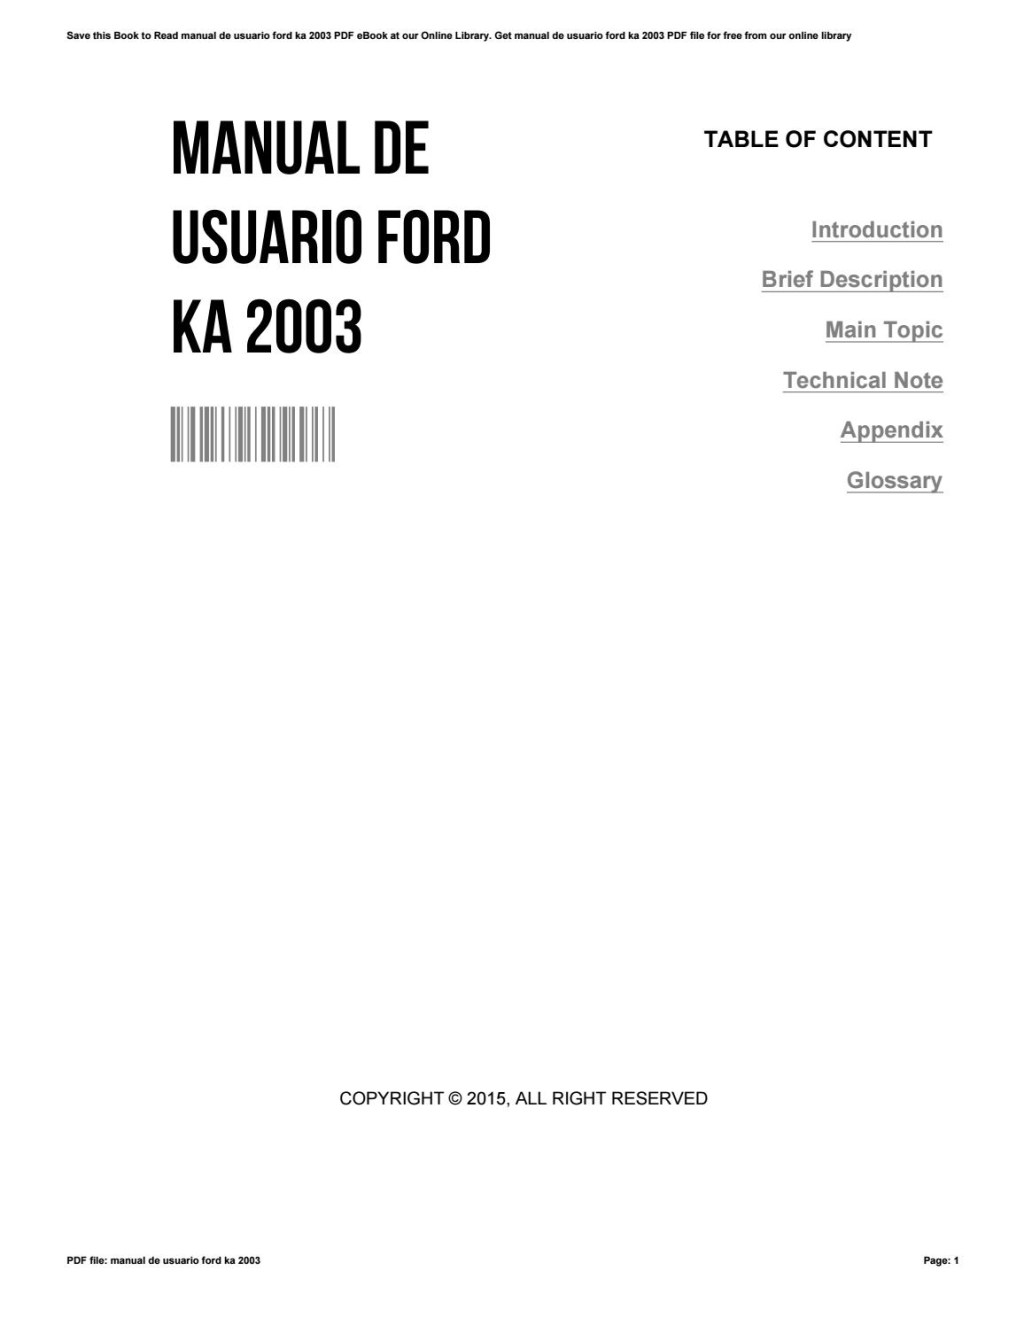 Picture of: Manual de usuario ford ka  by EarlRichardson – Issuu